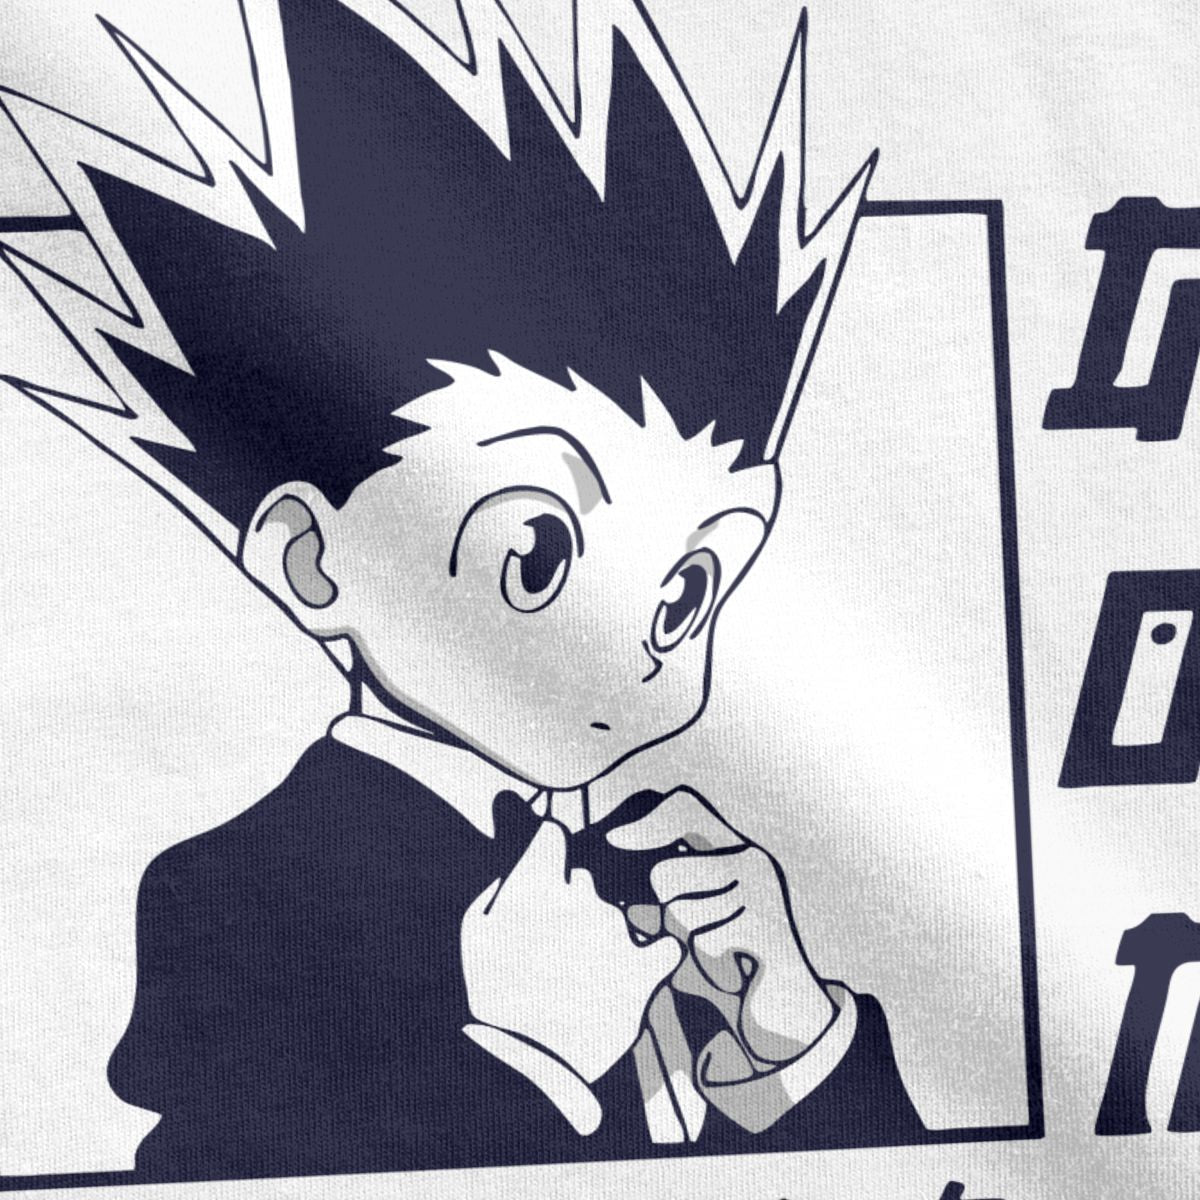 GON SUIT WHITE TEE